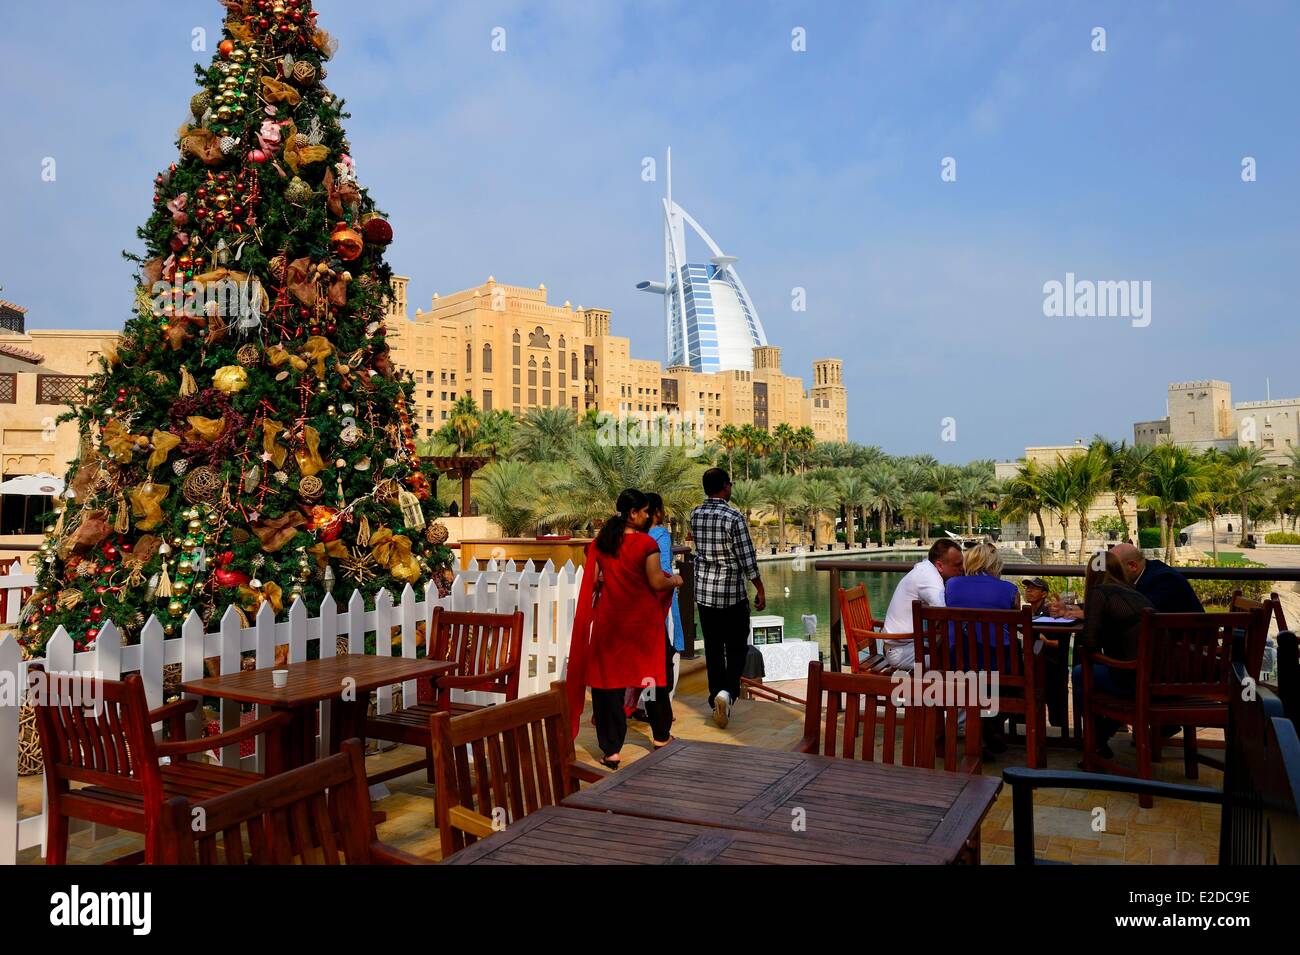 United Arab Emirates Dubai the Jumeirah area Madinat Jumeirah is a luxurious hotel complex with two 5 stars hotels 44 Stock Photo